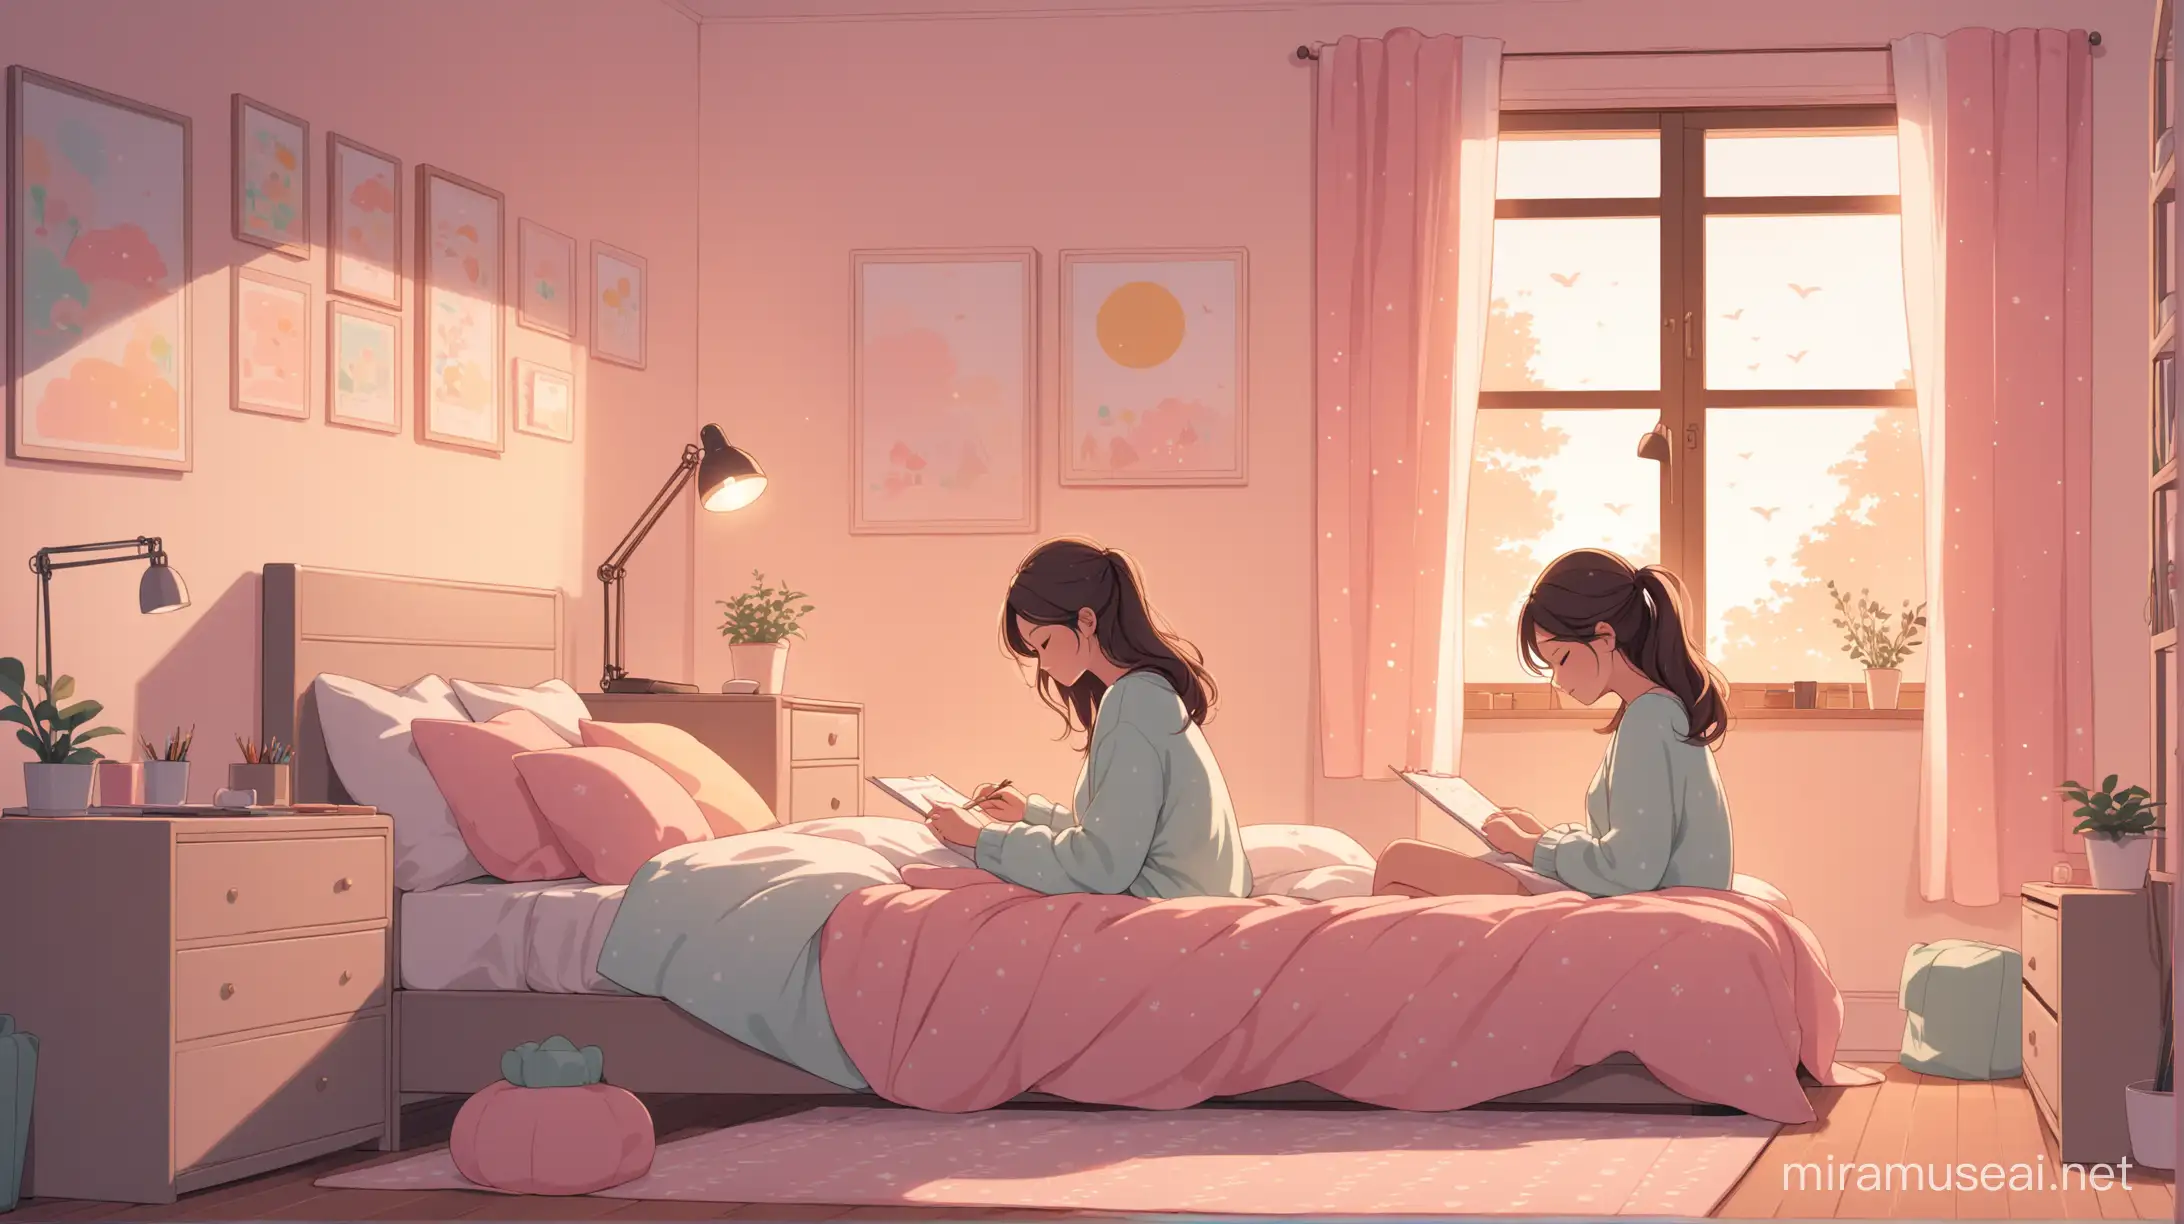 Animated drawing of a girl working in her cosy bedroom. The atmosphere and colours are relaxing, soft and pastel.